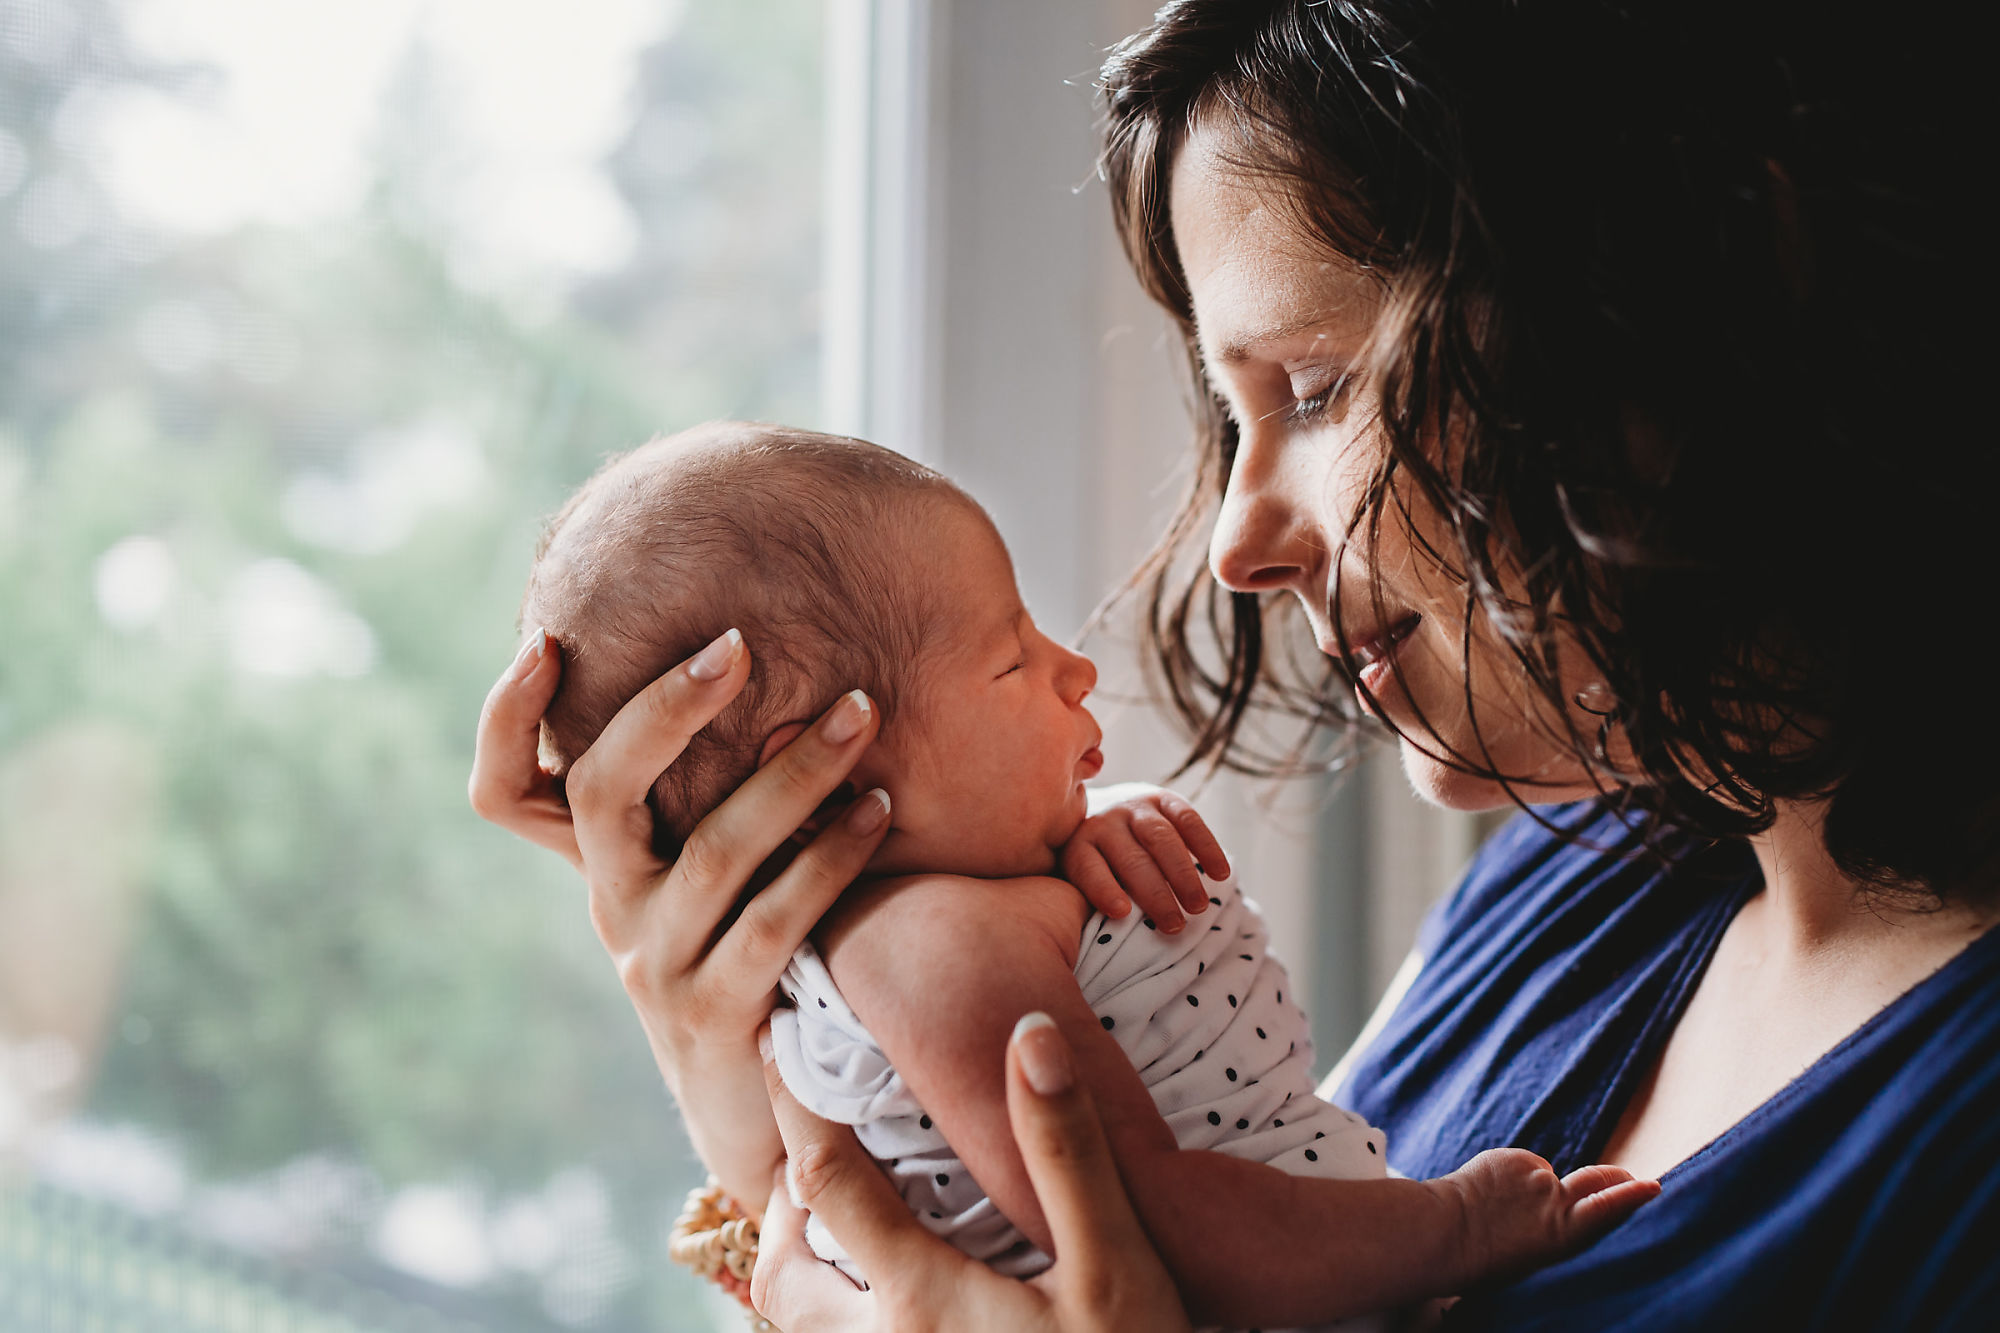 Dundas Newborn Photographer Jennifer Blaak captures a tender moment between mother and baby during their newborn and family lifestyle photography session at home in Hamilton.